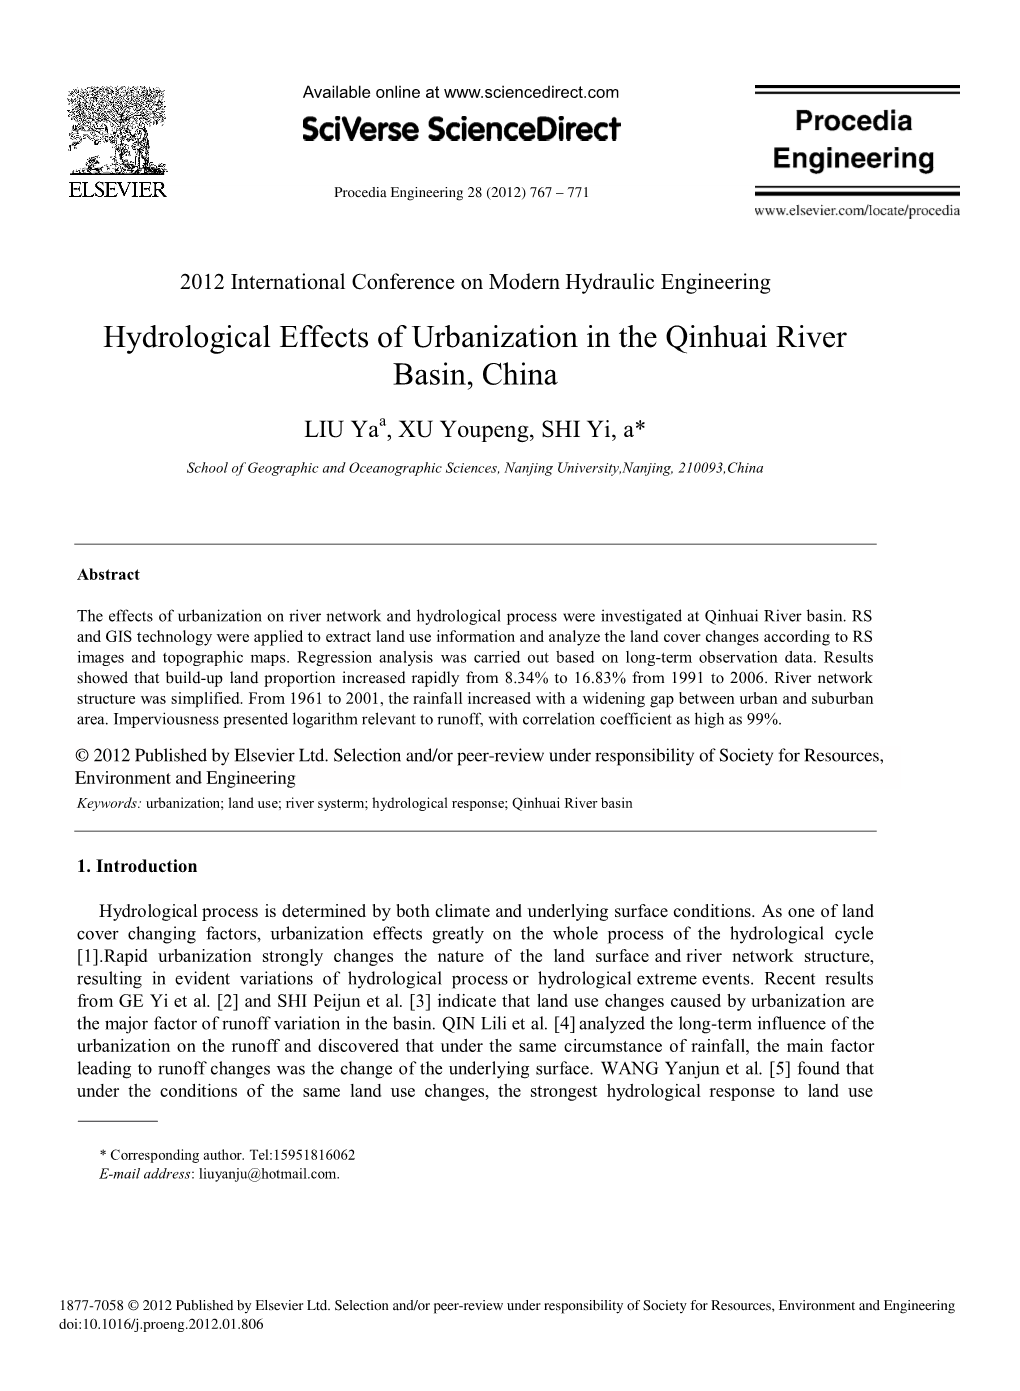 Hydrological Effects of Urbanization in the Qinhuai River Basin, China